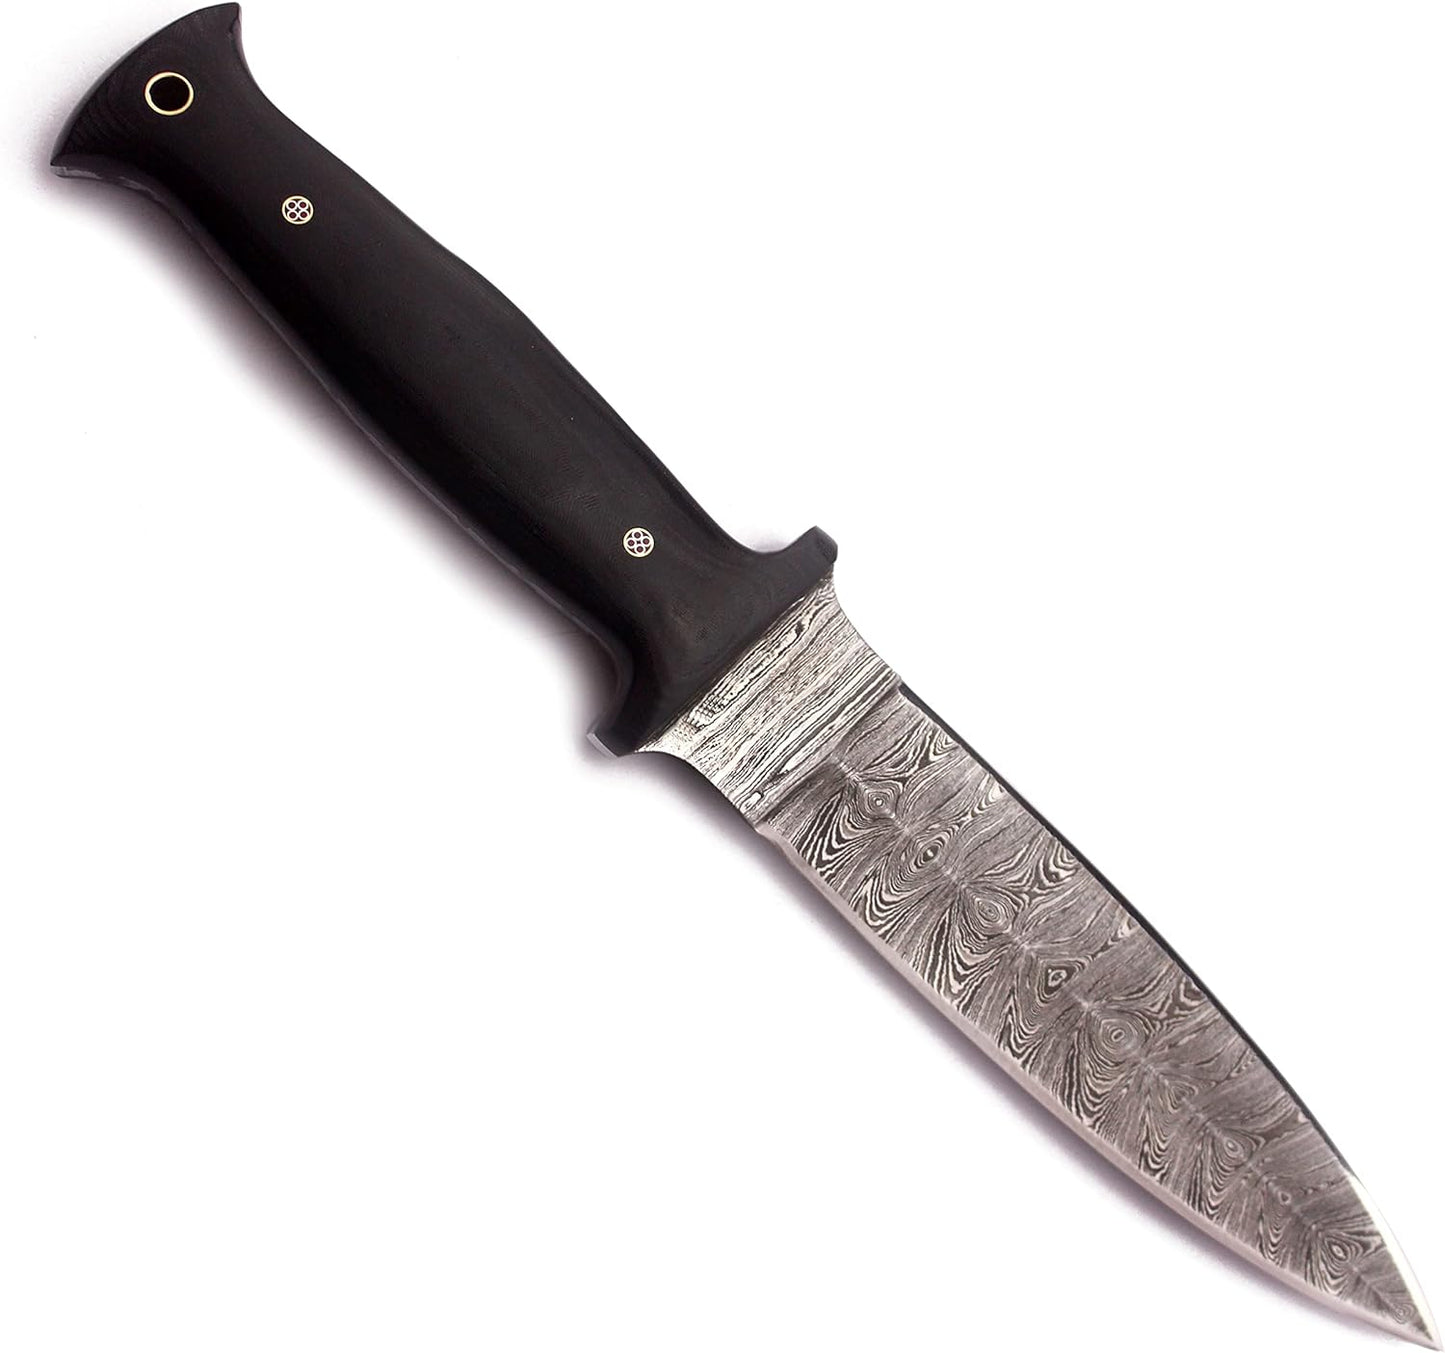 KD Damascus Steel Hunting Knife with Cowhide Leather Sheath